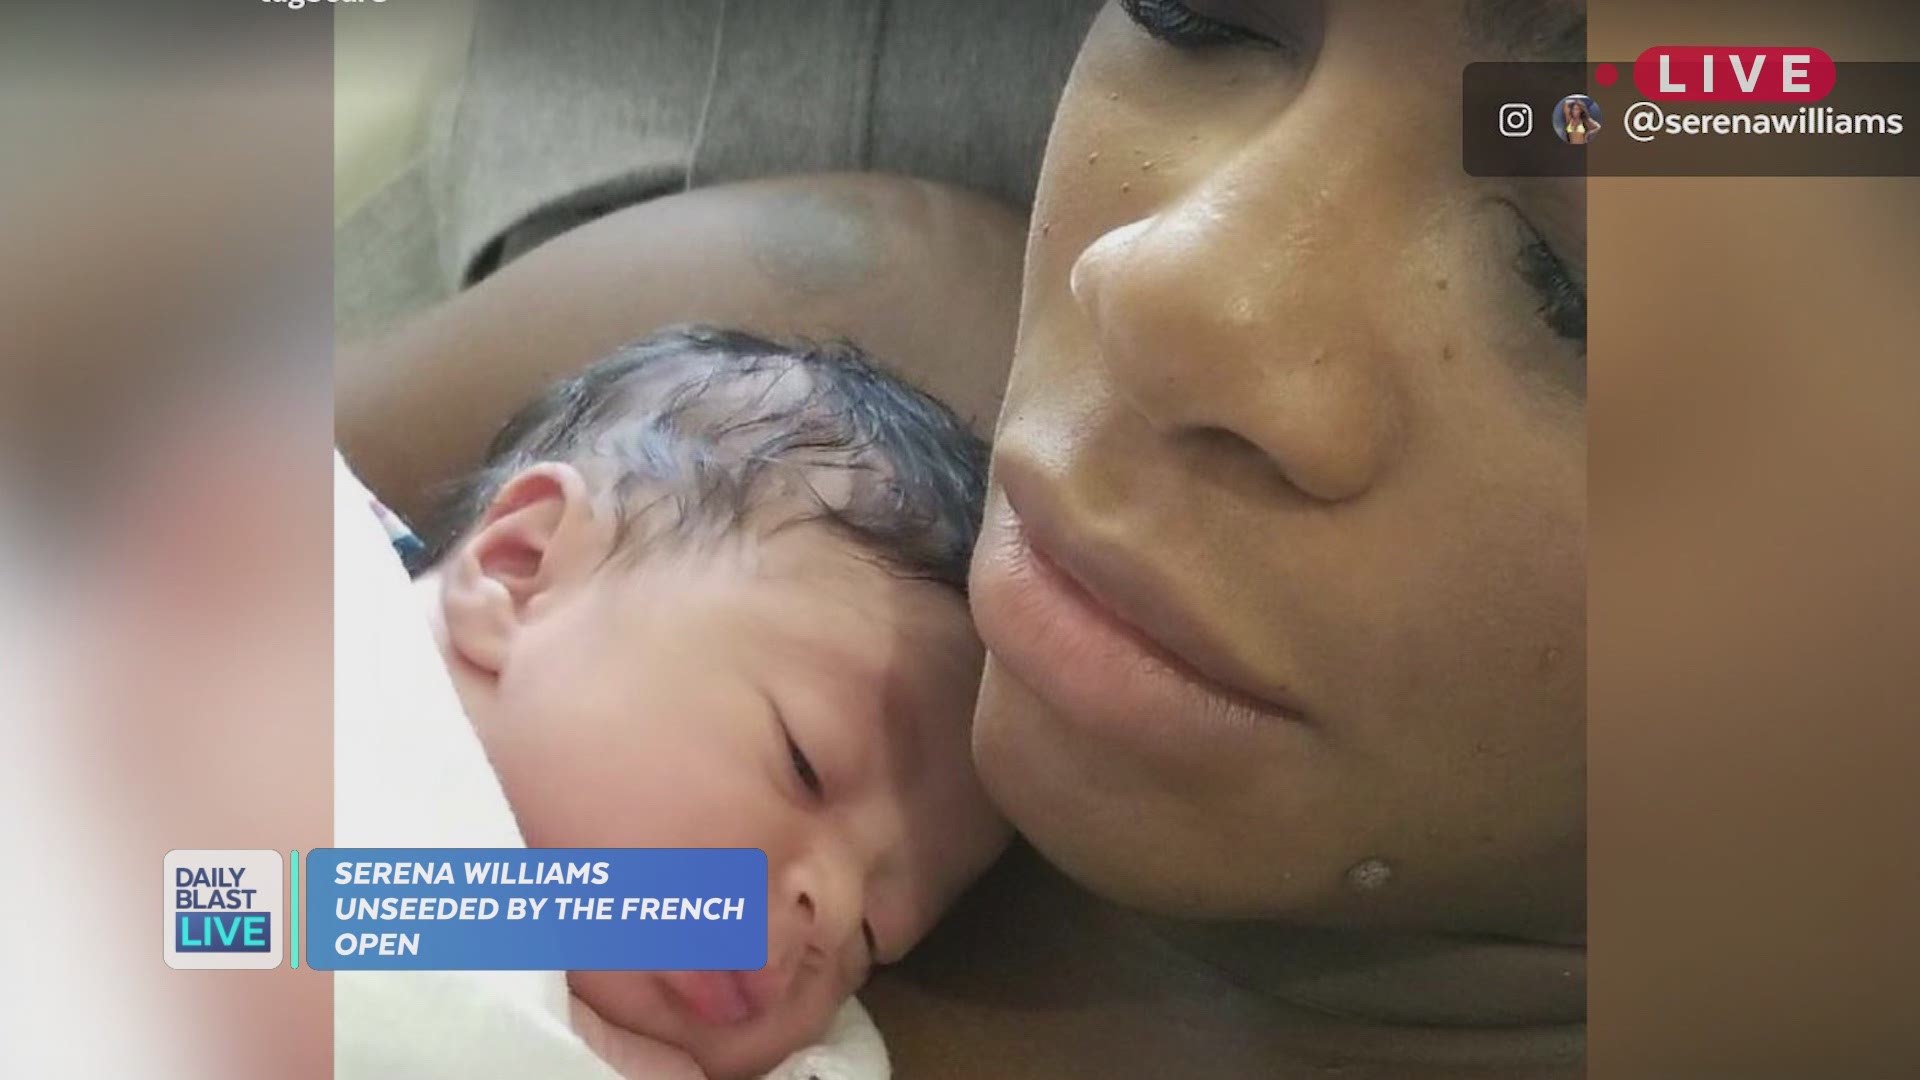 She may be the greatest tennis player of all time, but Serena Williams has just learned that she will not be seeded in the upcoming French Open. This would have been her first major competition since giving birth back in September. This significant snub h